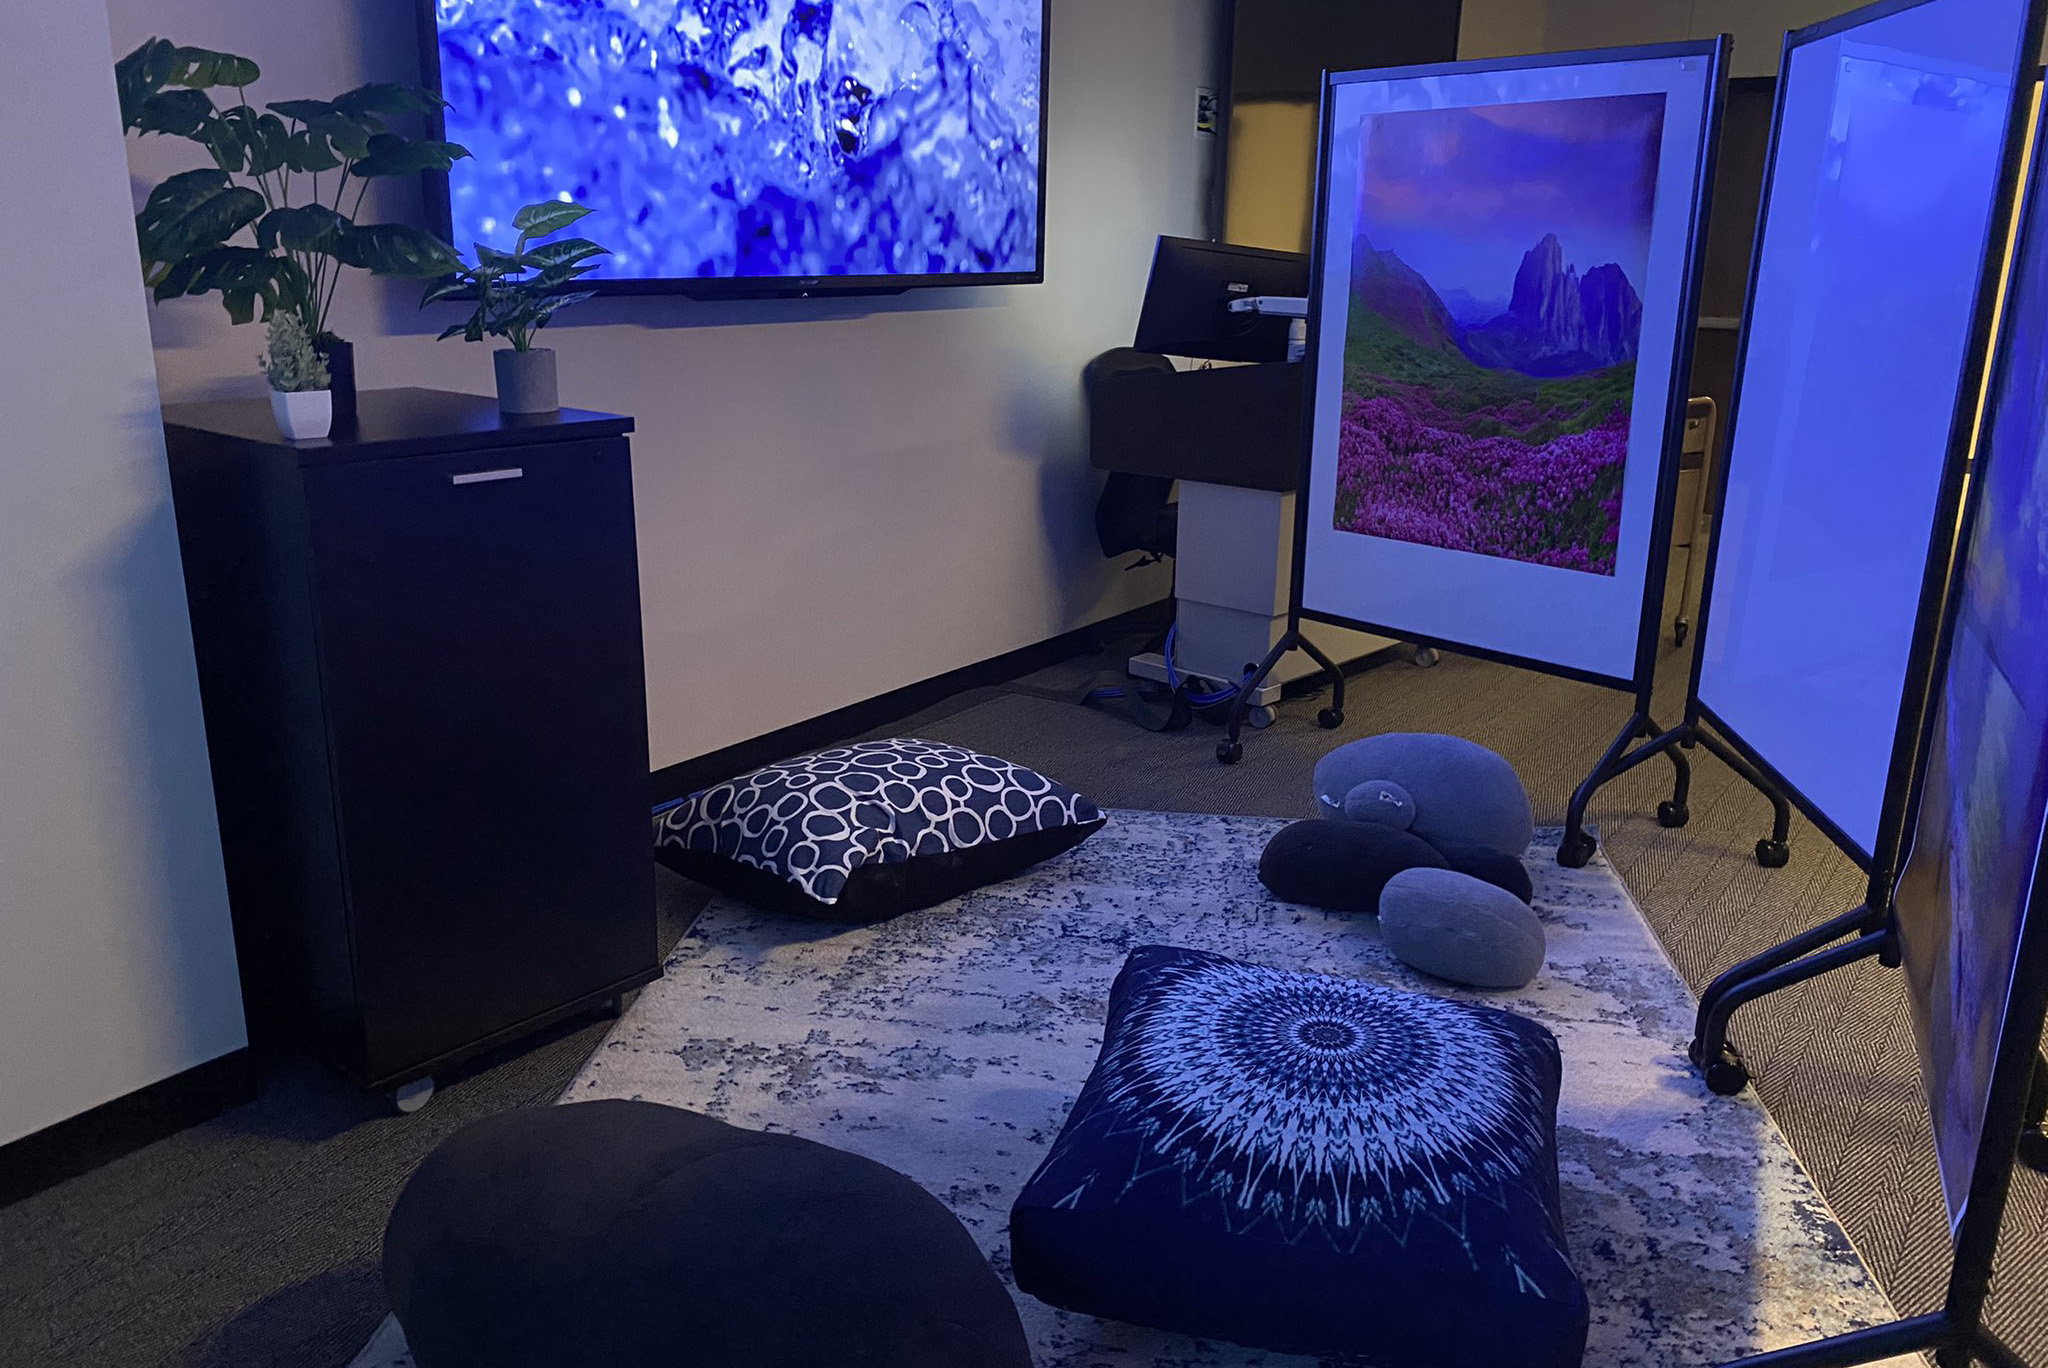 New Sensory-Friendly Room Designed by HDG is Unveiled at